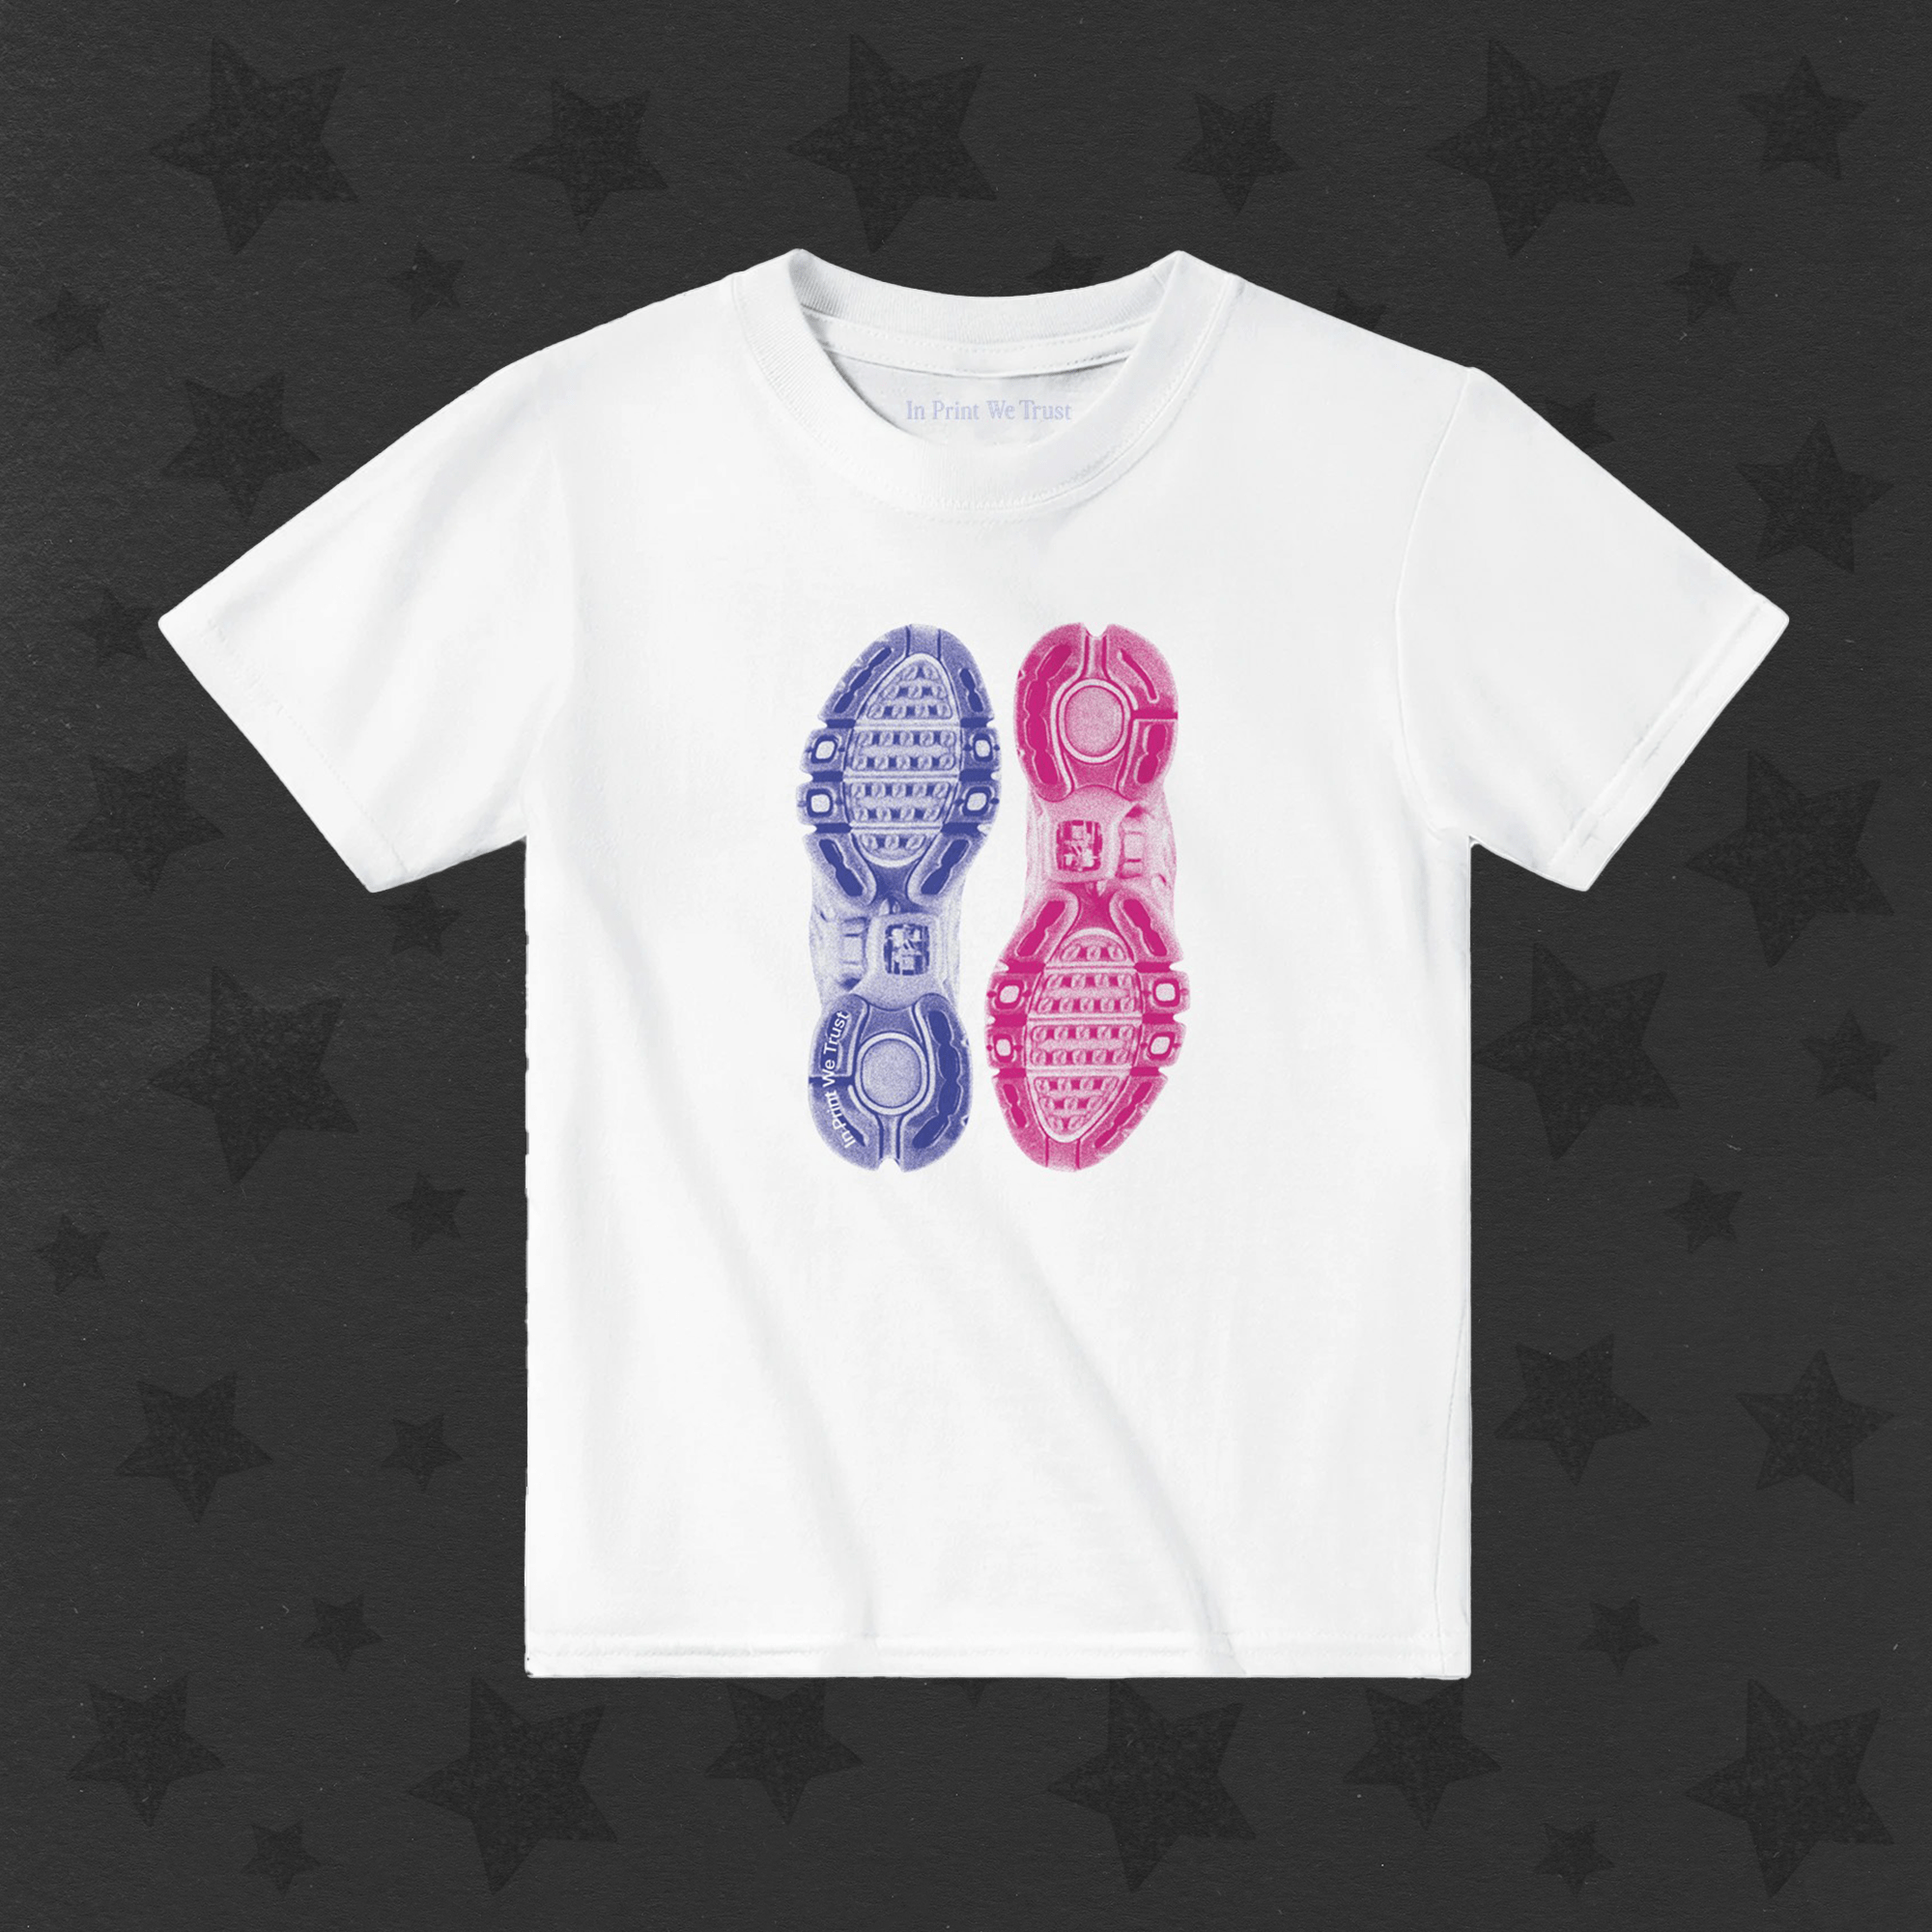 'We Come as a Pair' premium baby tee - In Print We Trust